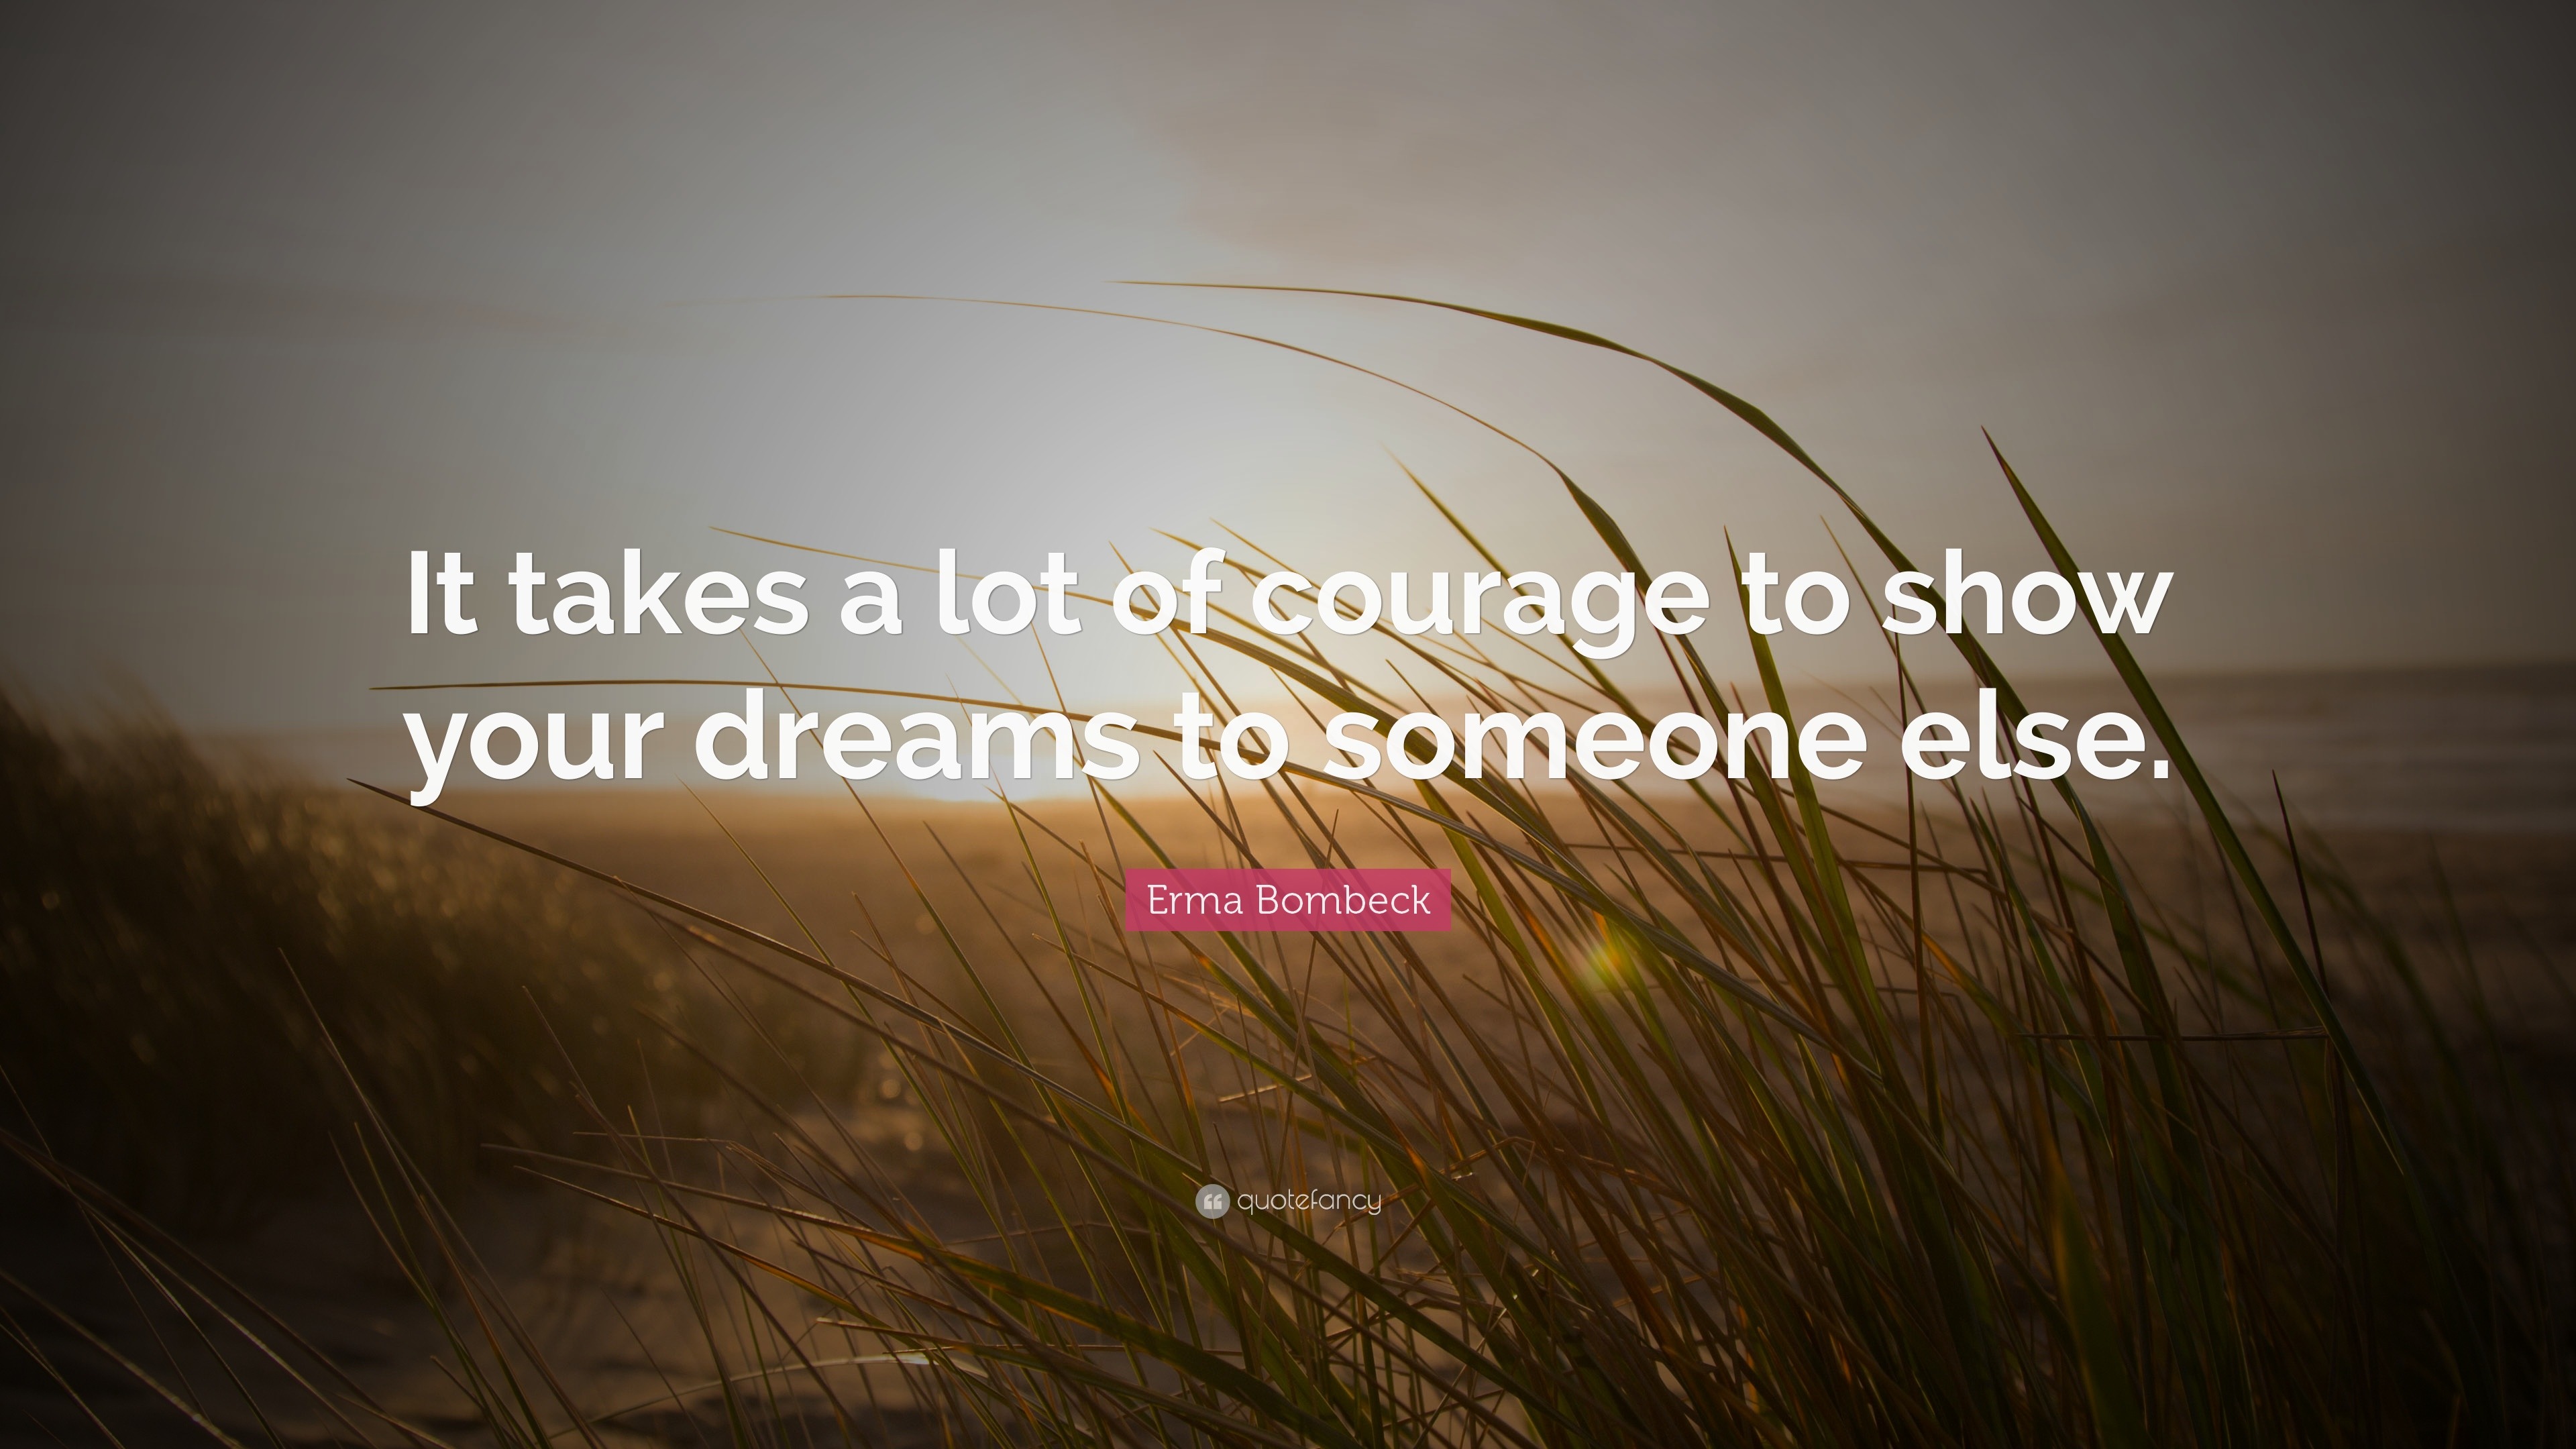 Courage Quotes “It takes a lot of courage to show your dreams to someone